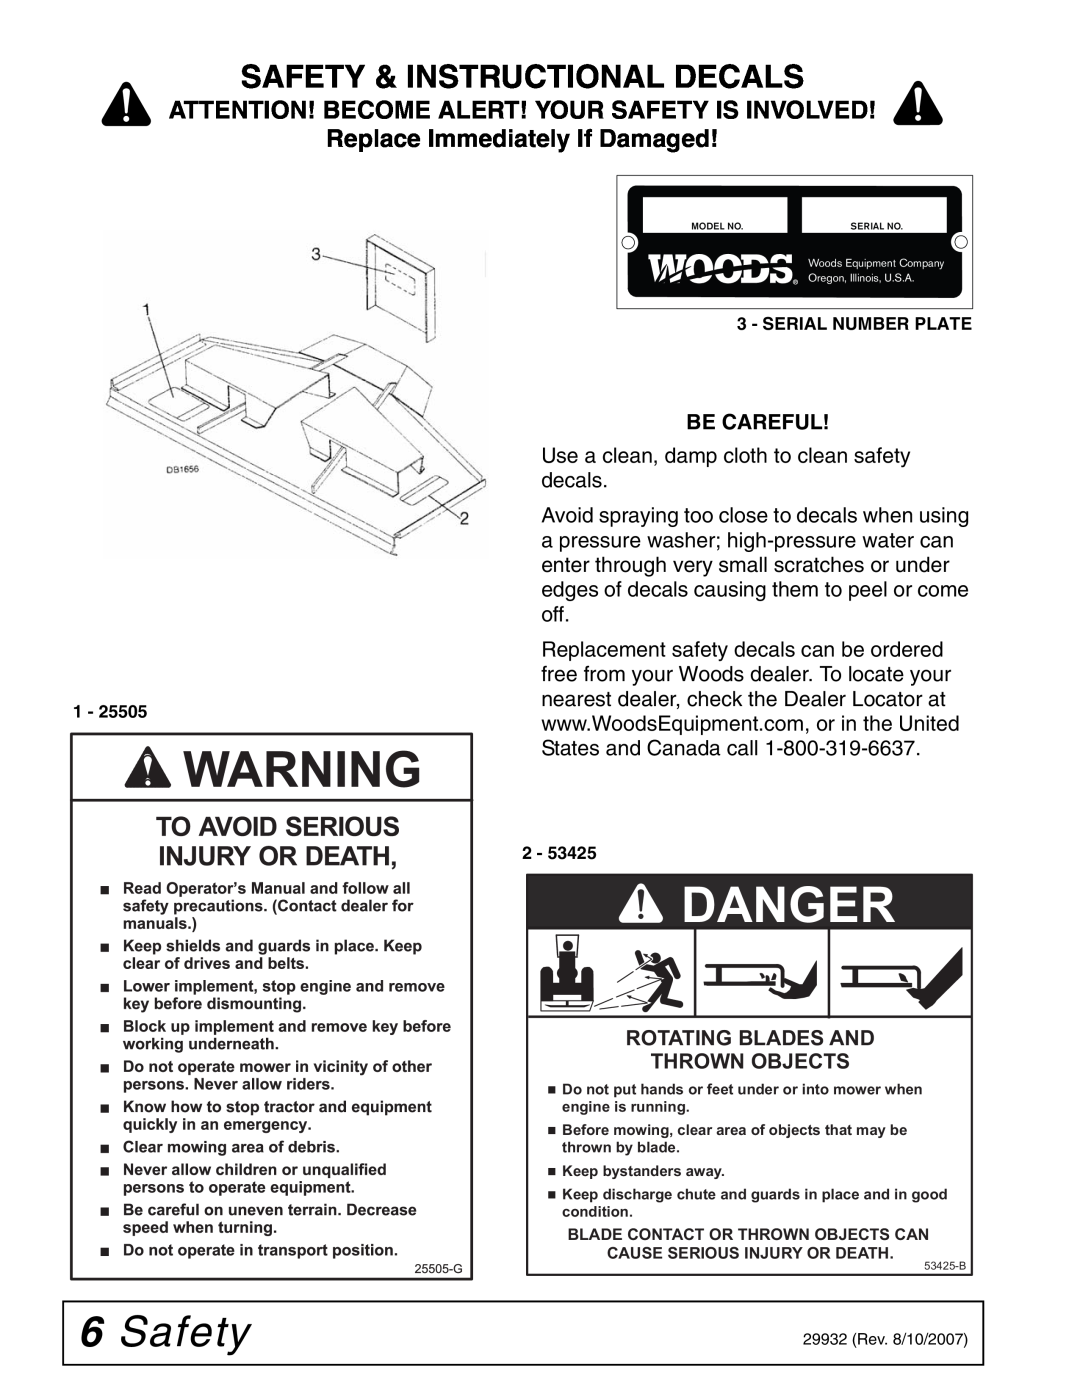 Woods Equipment 59LB-1 Safety & Instructional Decals, Replace Immediately If Damaged, Be Careful, Danger, 53425-B 